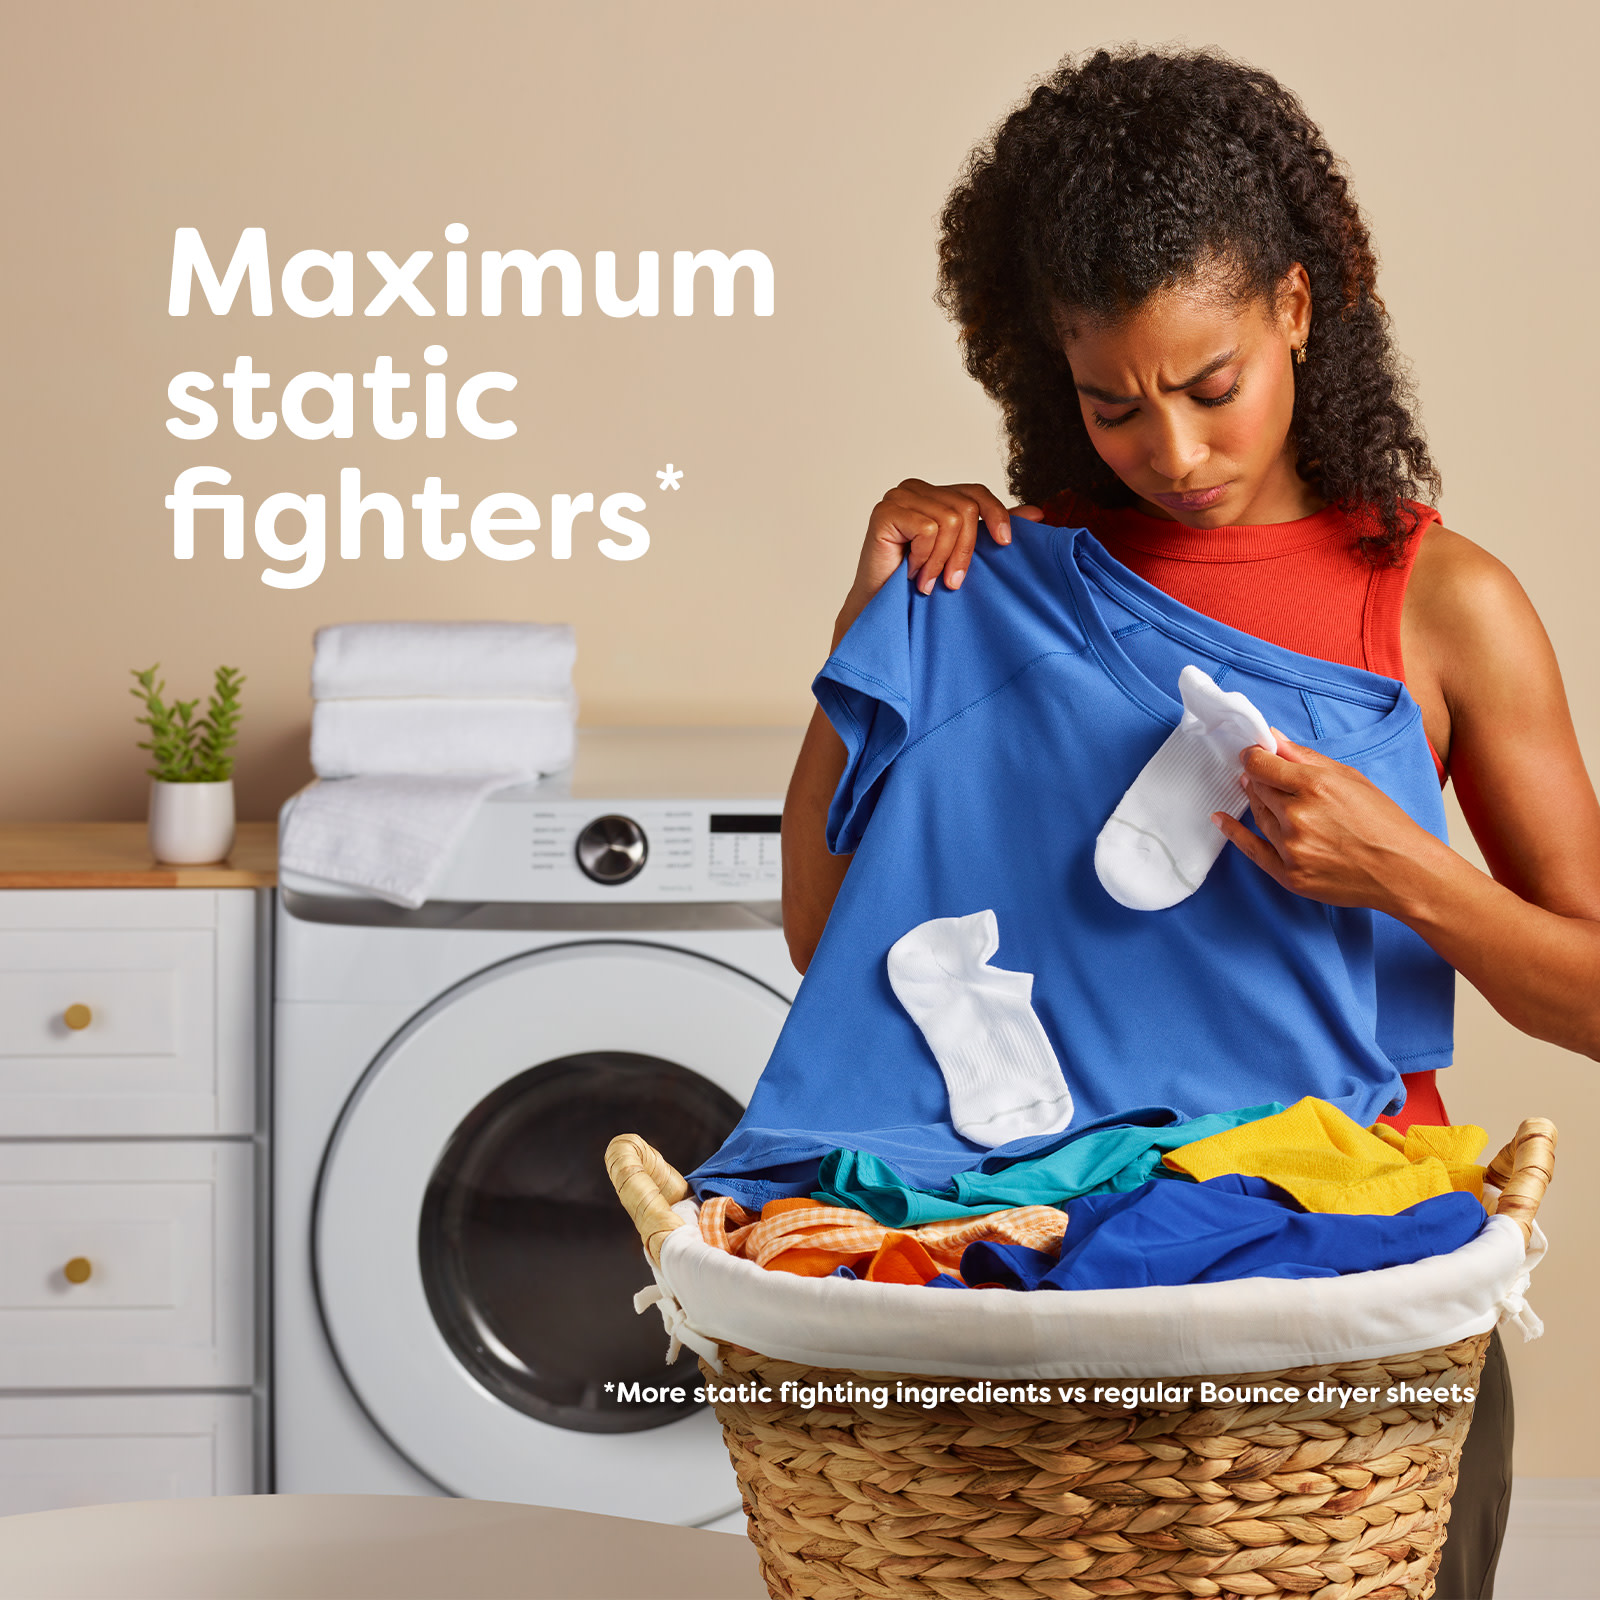 Bounce Lasting Fresh Dryer Sheets benefits: Maximum static fighters